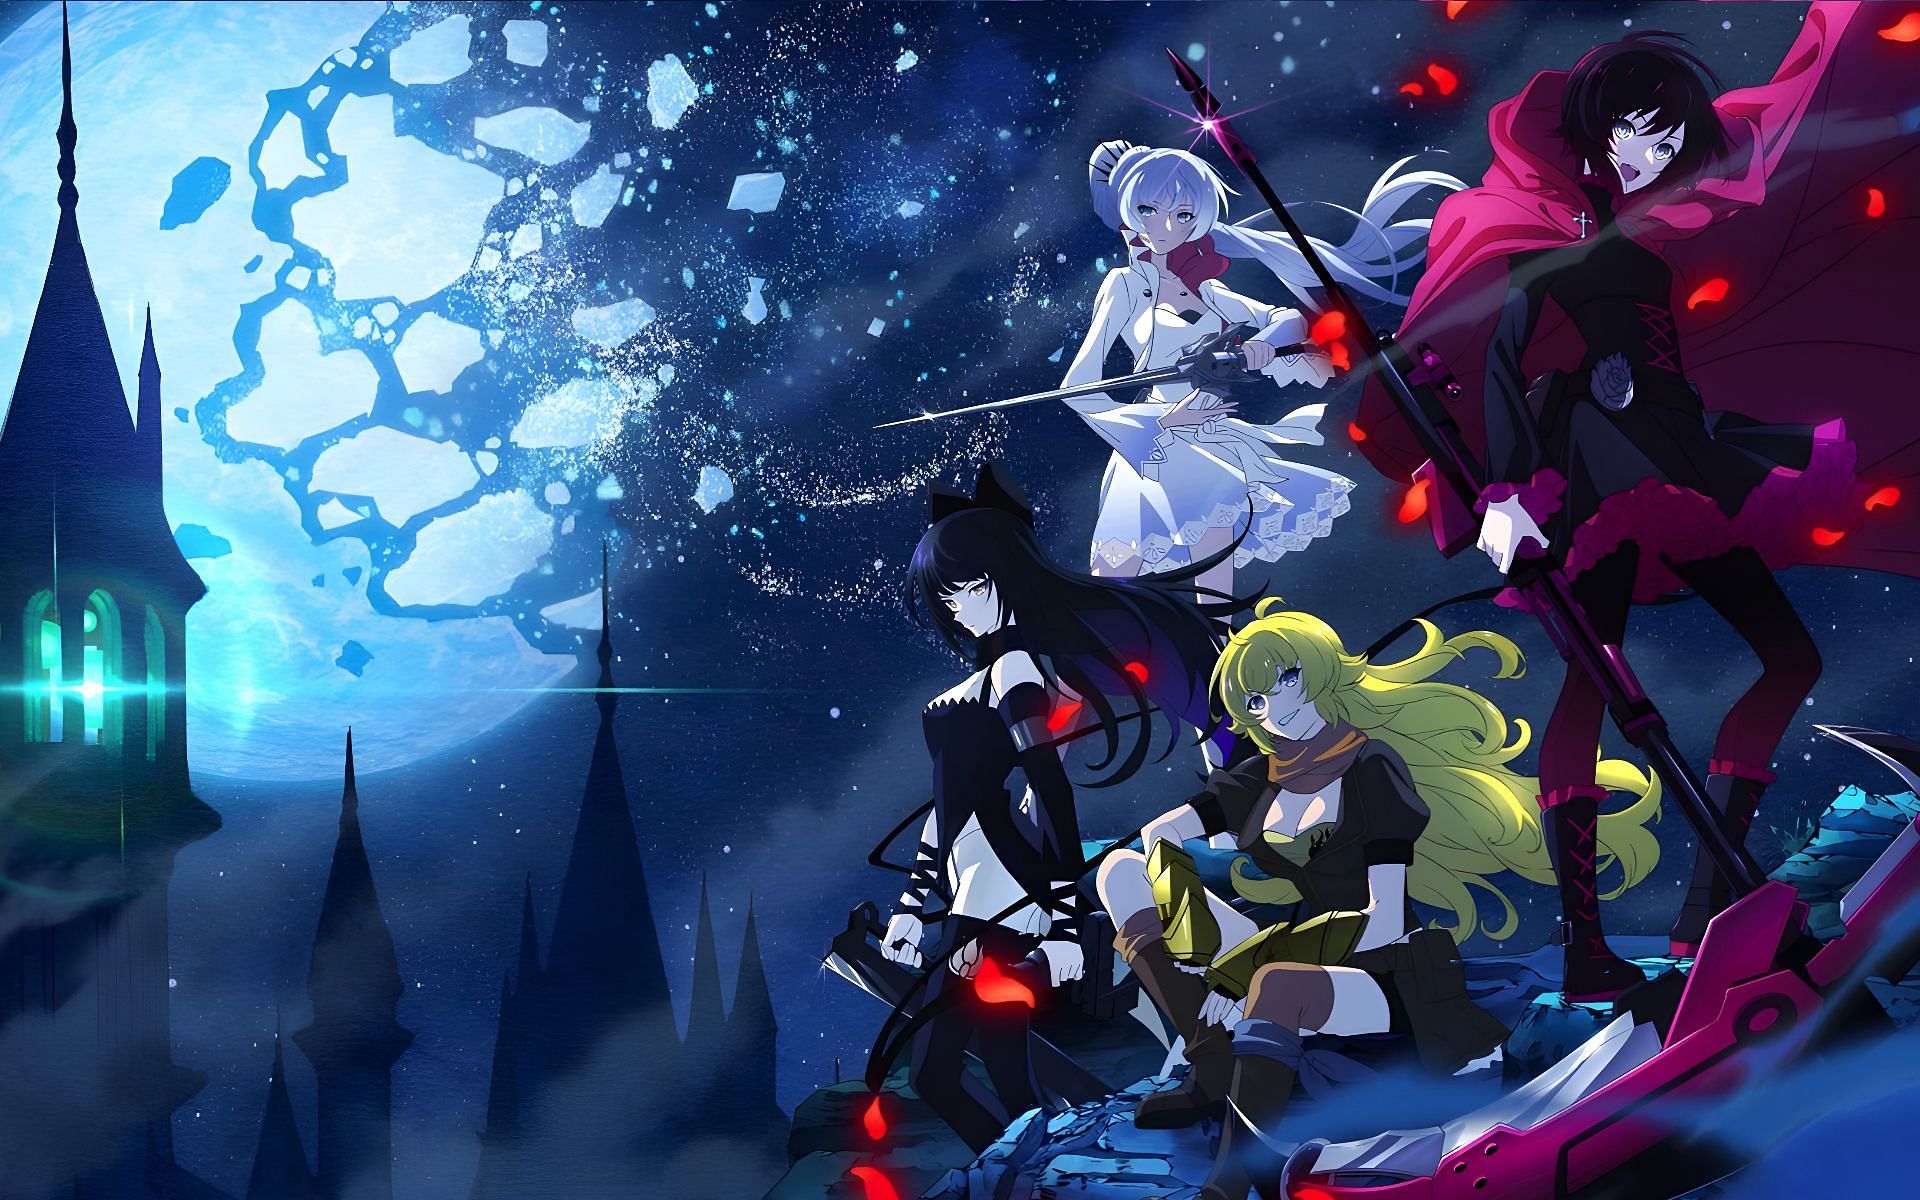 RWBY: Ice Queendom anime will start to air episodes on July 3, 2022